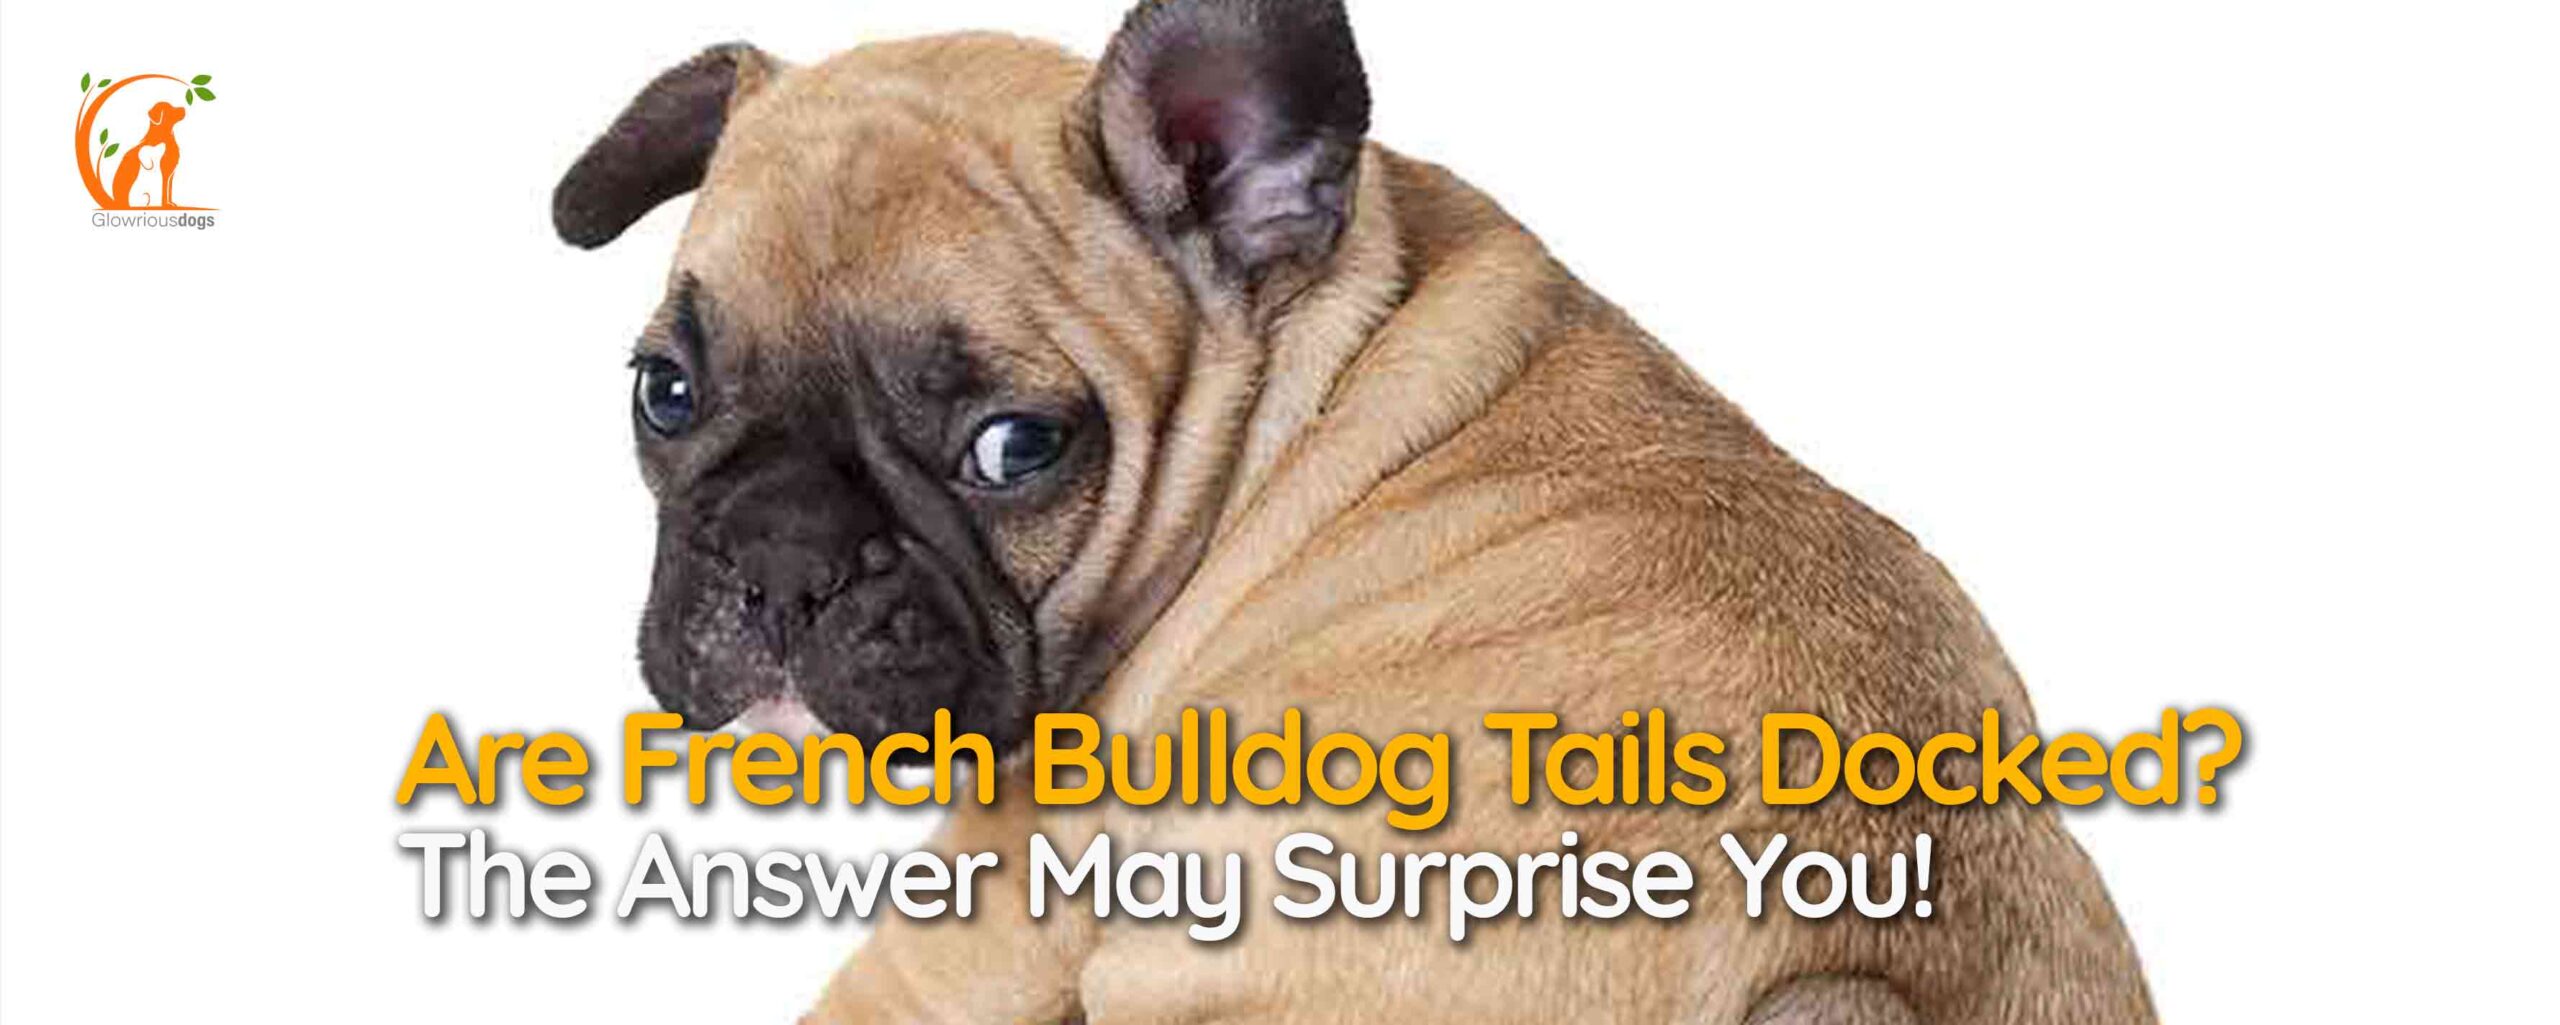 Are French Bulldog Tails Docked? The Answer May Surprise You!